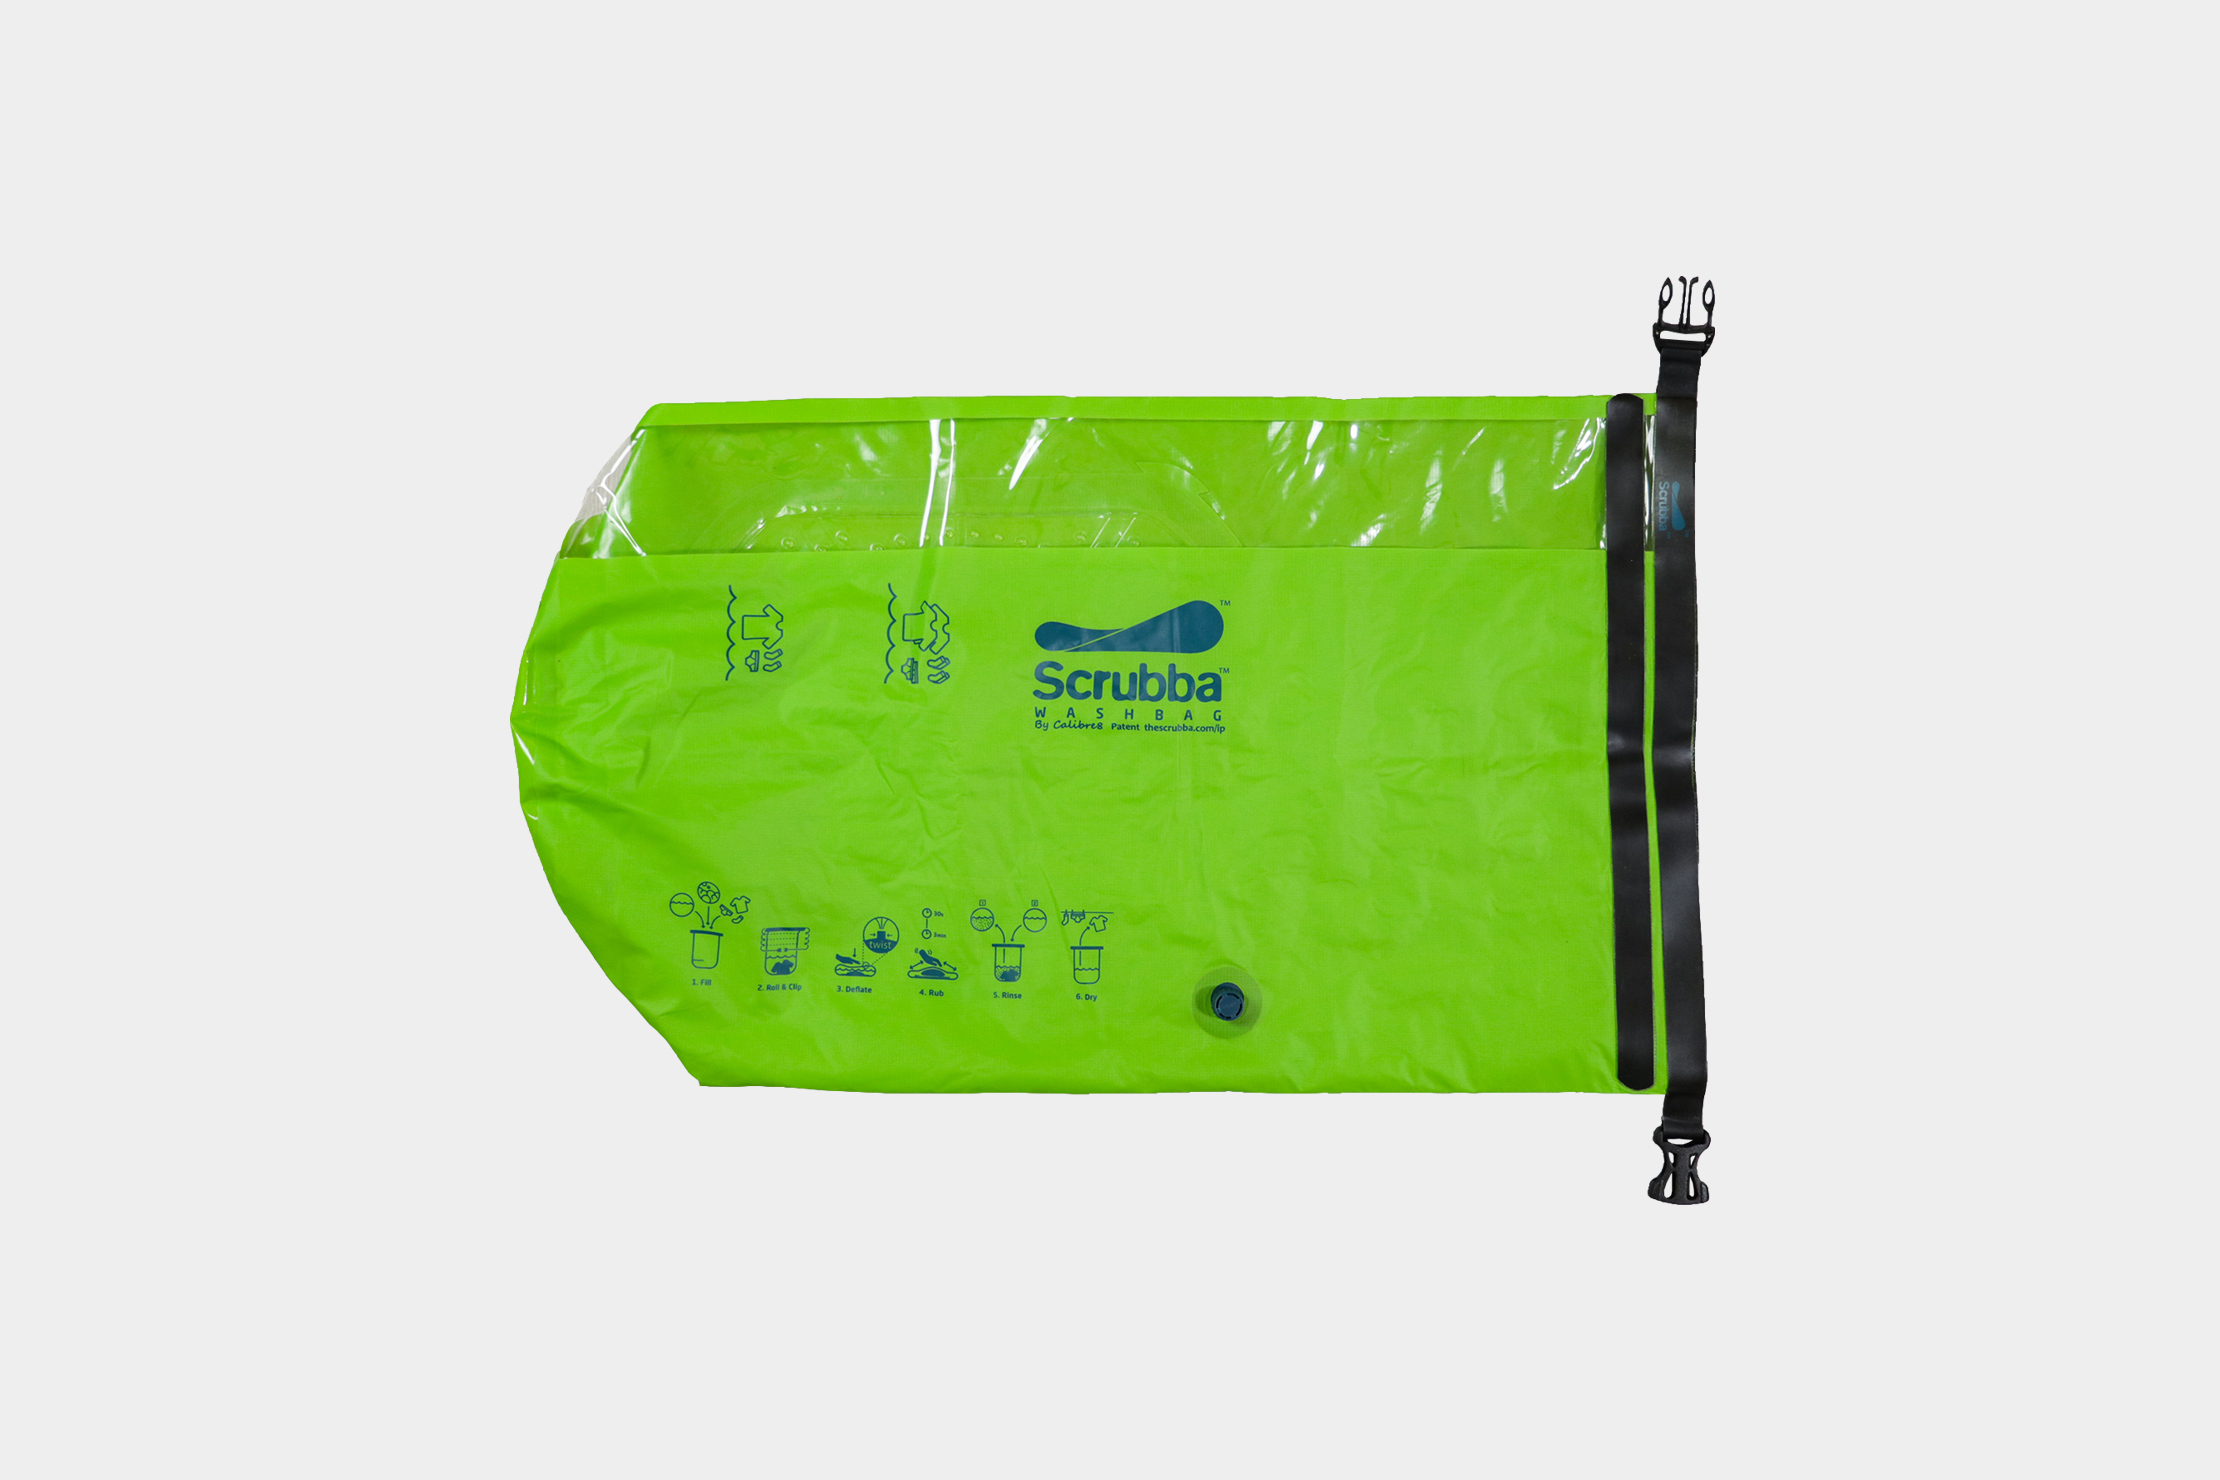 I Tried the Scrubba Bag  Heres My Verdict